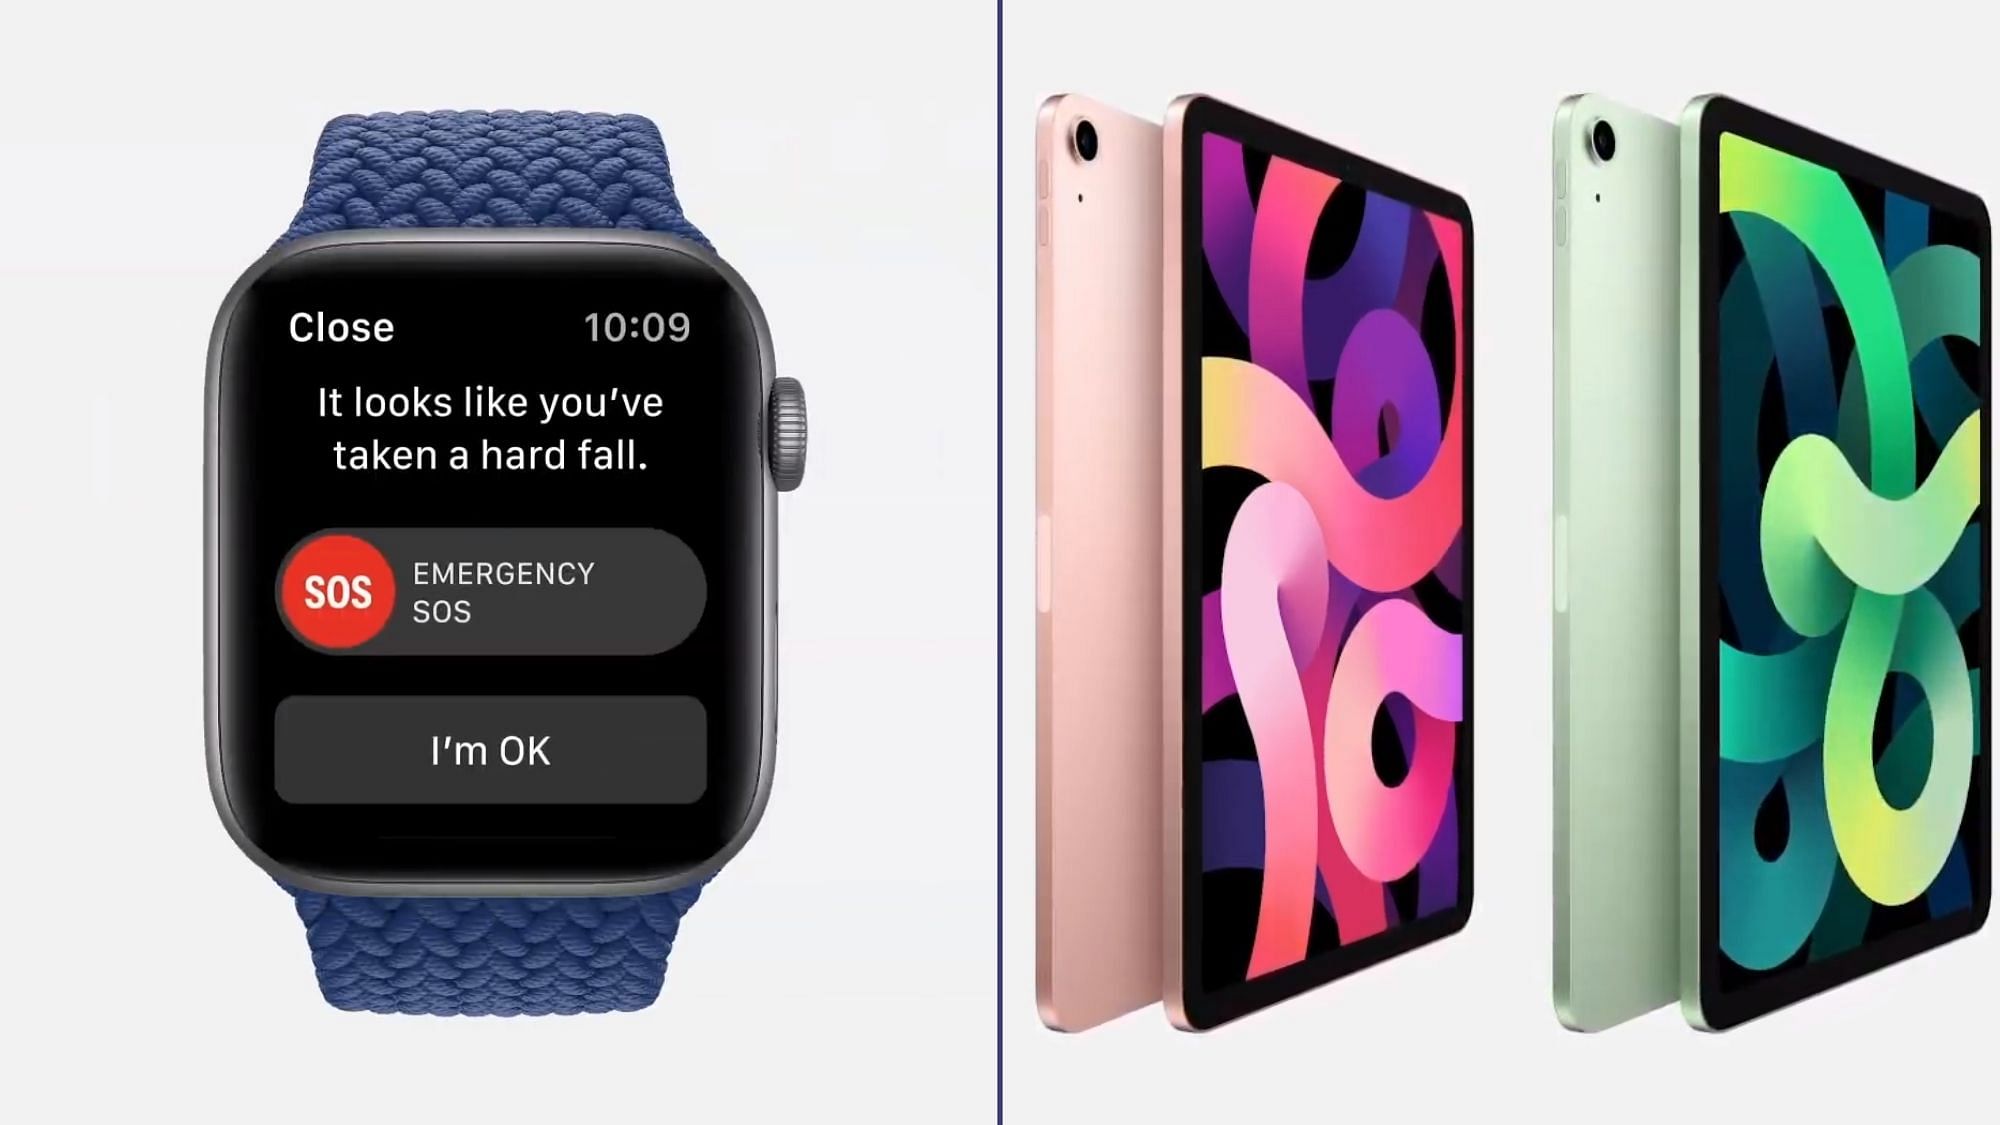 The new Apple Watch Series 6 (left) and the new iPad Air (right).